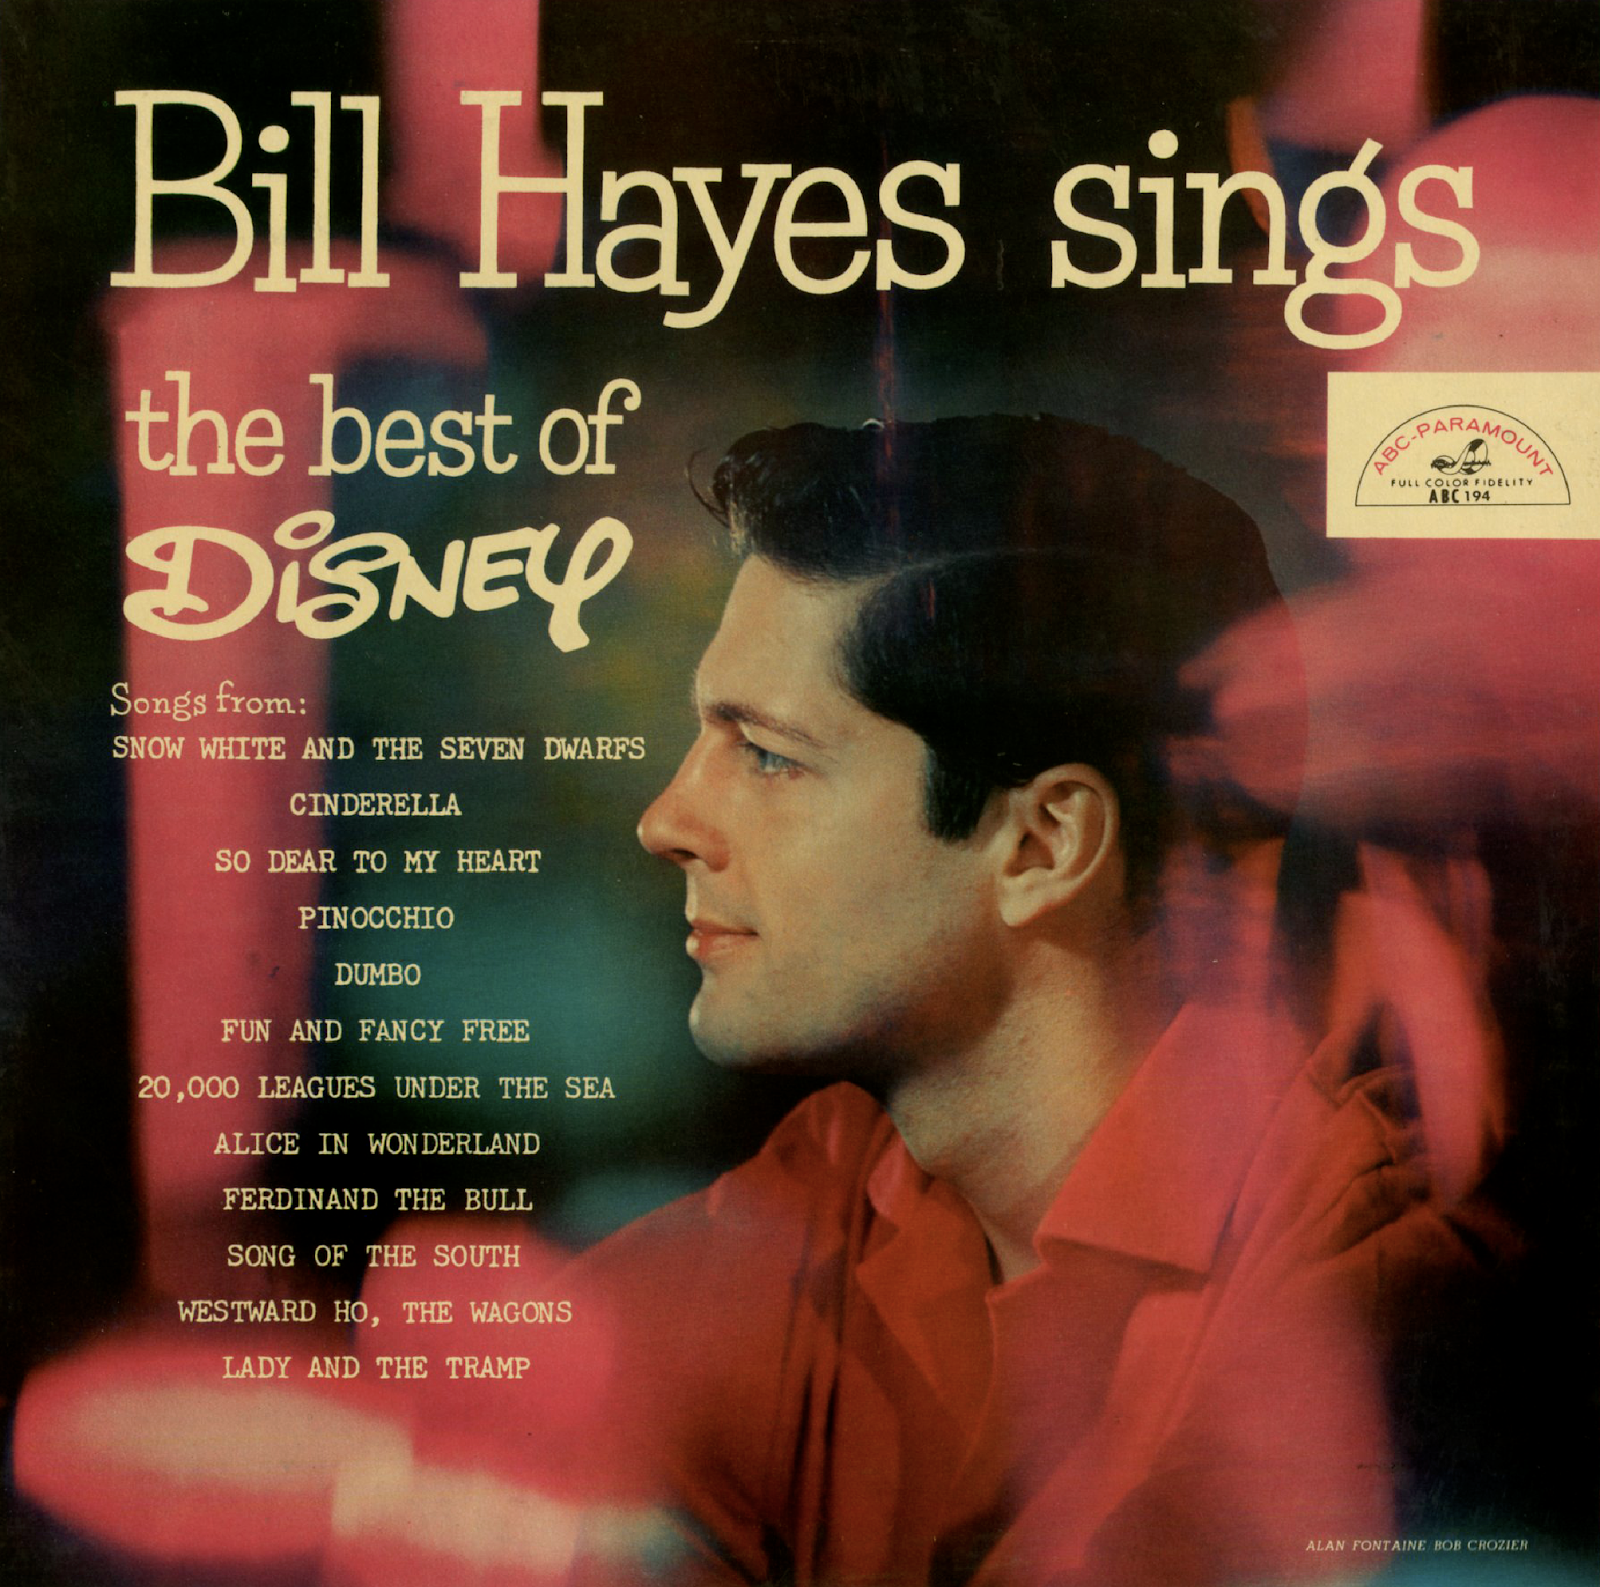 Unearthed In The Atomic Attic: Bill Hayes Sings The Best Of Disney